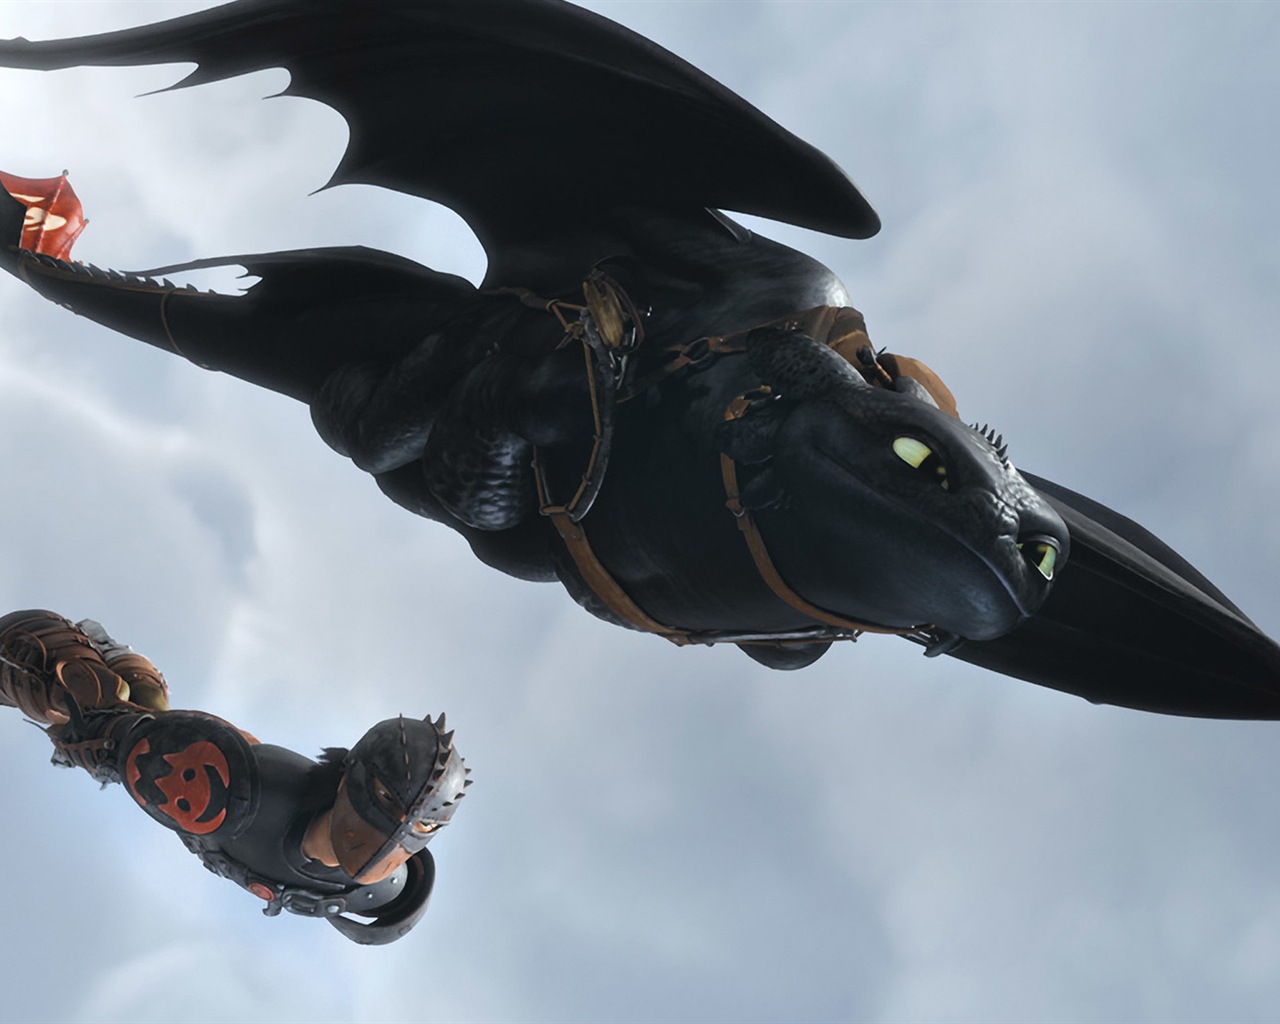 How to Train Your Dragon 2 HD wallpapers #6 - 1280x1024